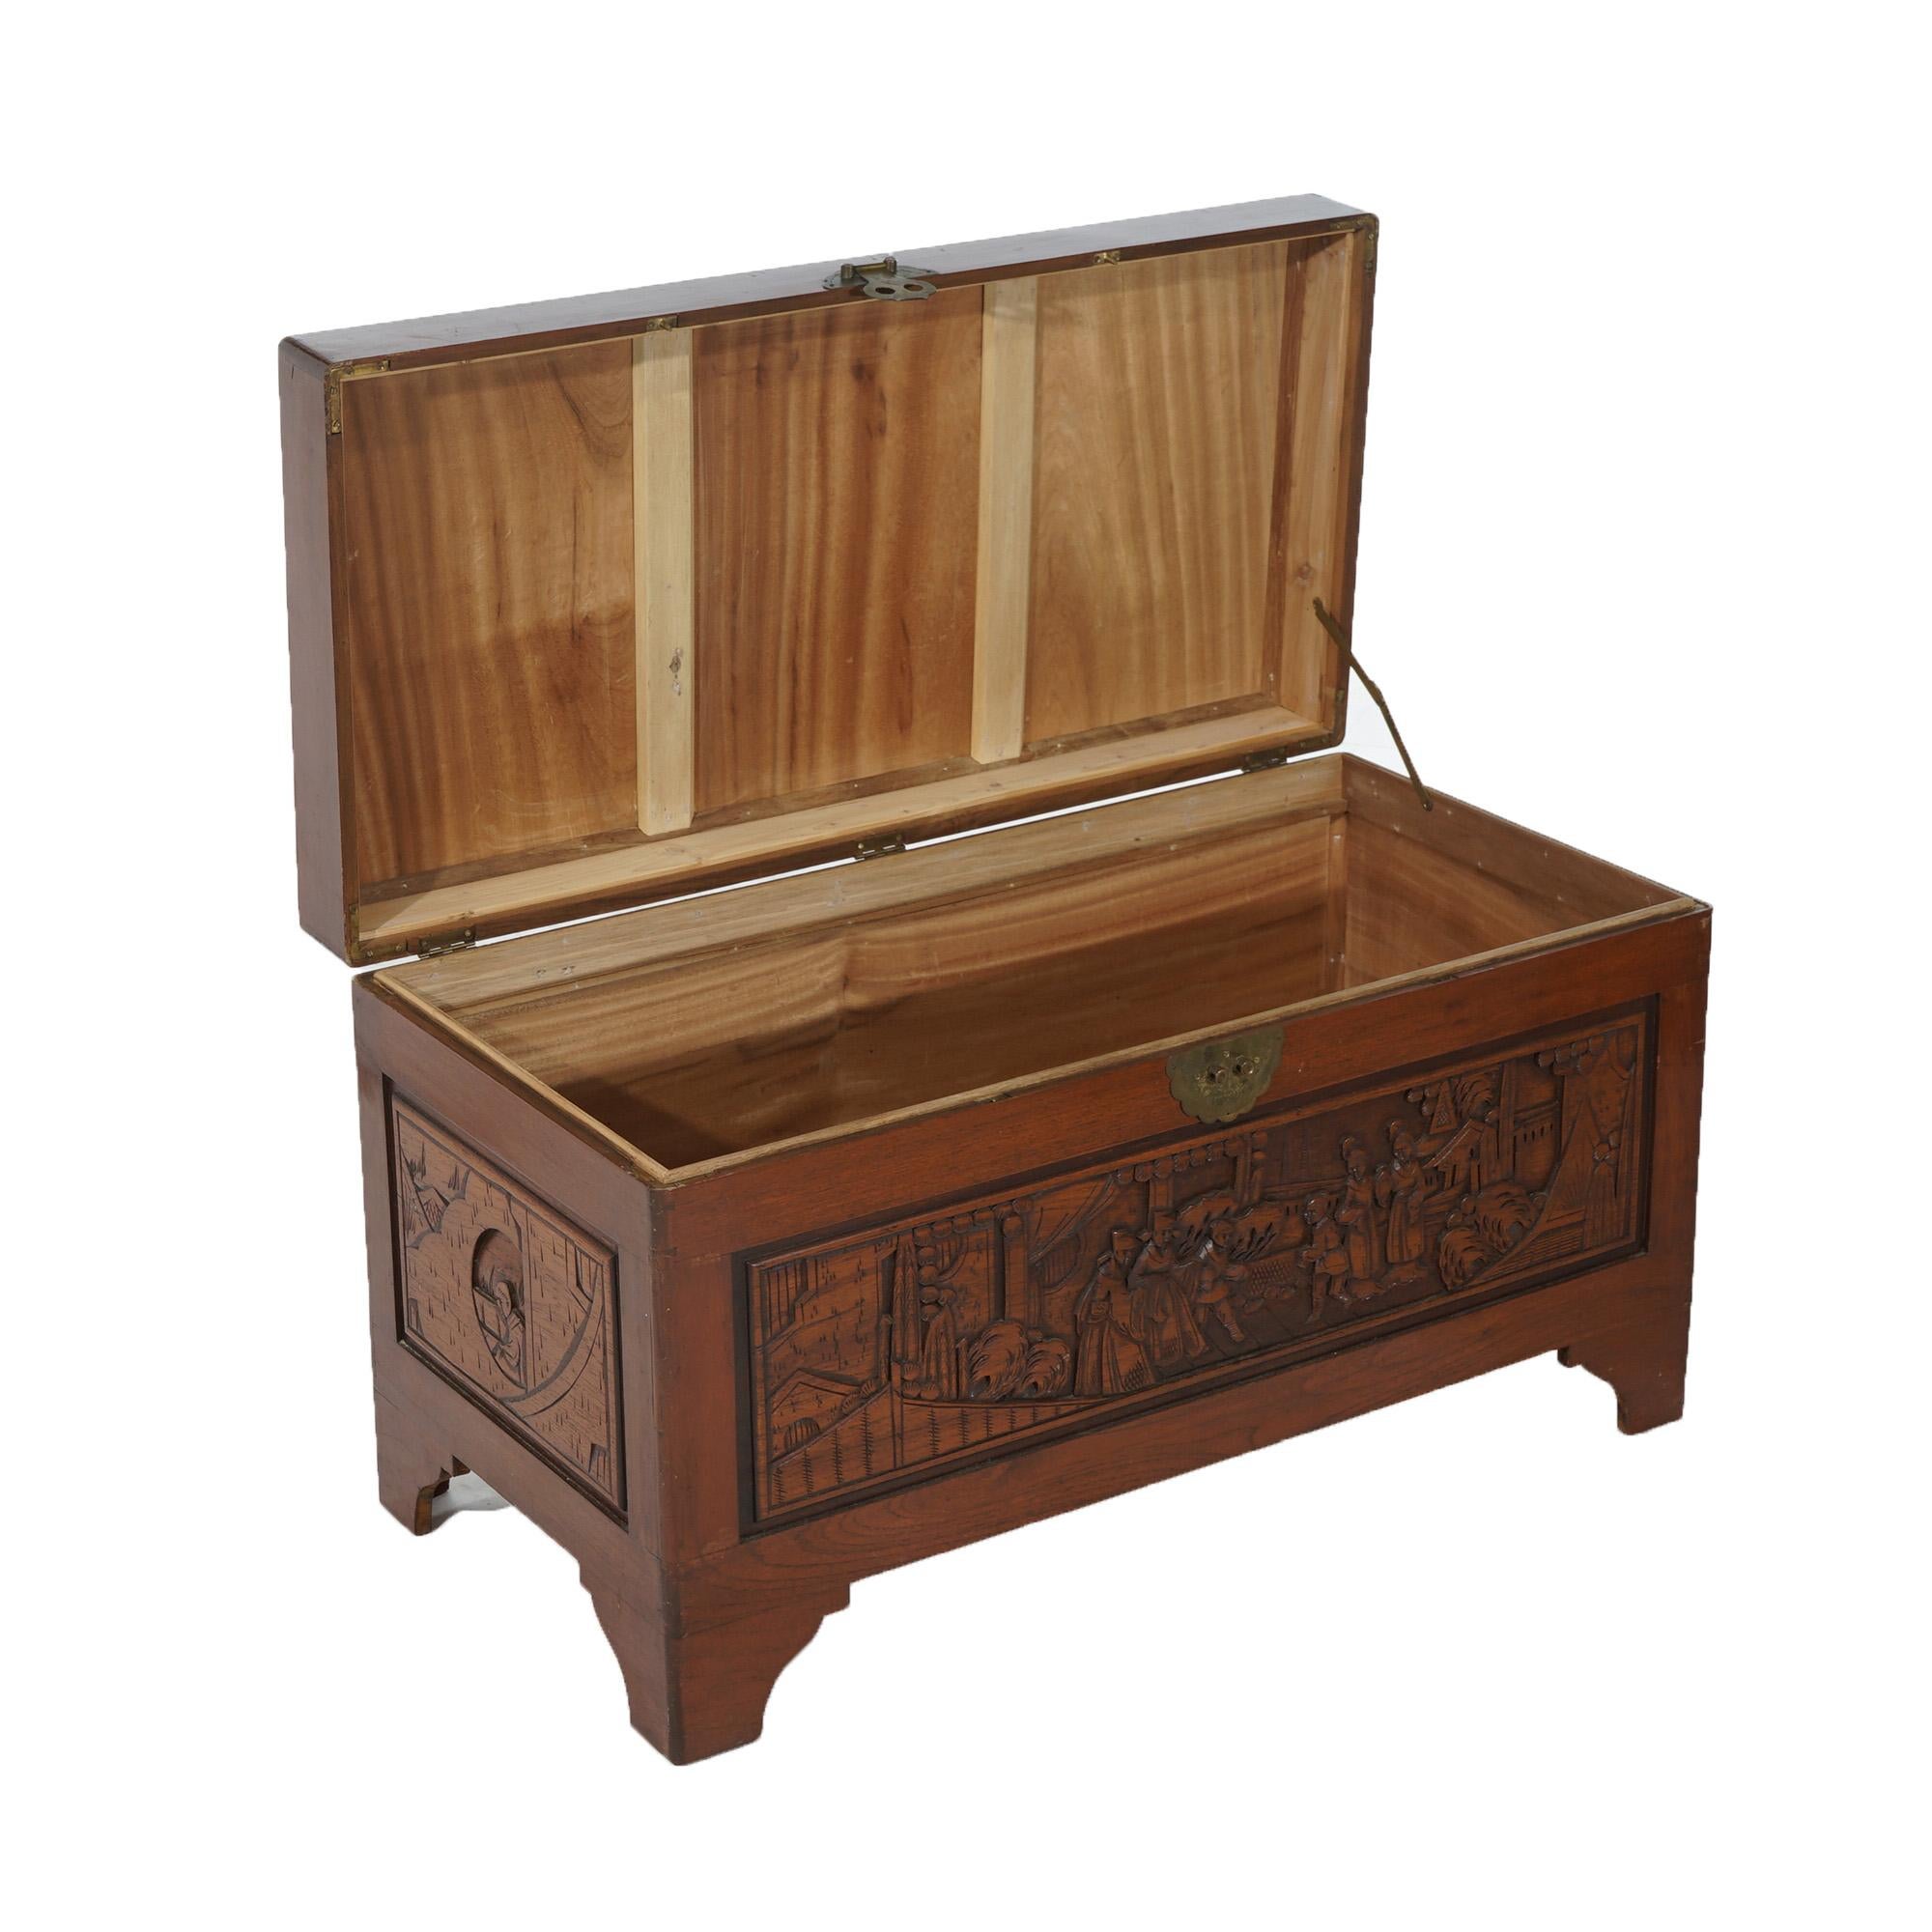 Chinese Carved Hardwood Figural Blanket Chest with Street Scene in Relief 20thC For Sale 1